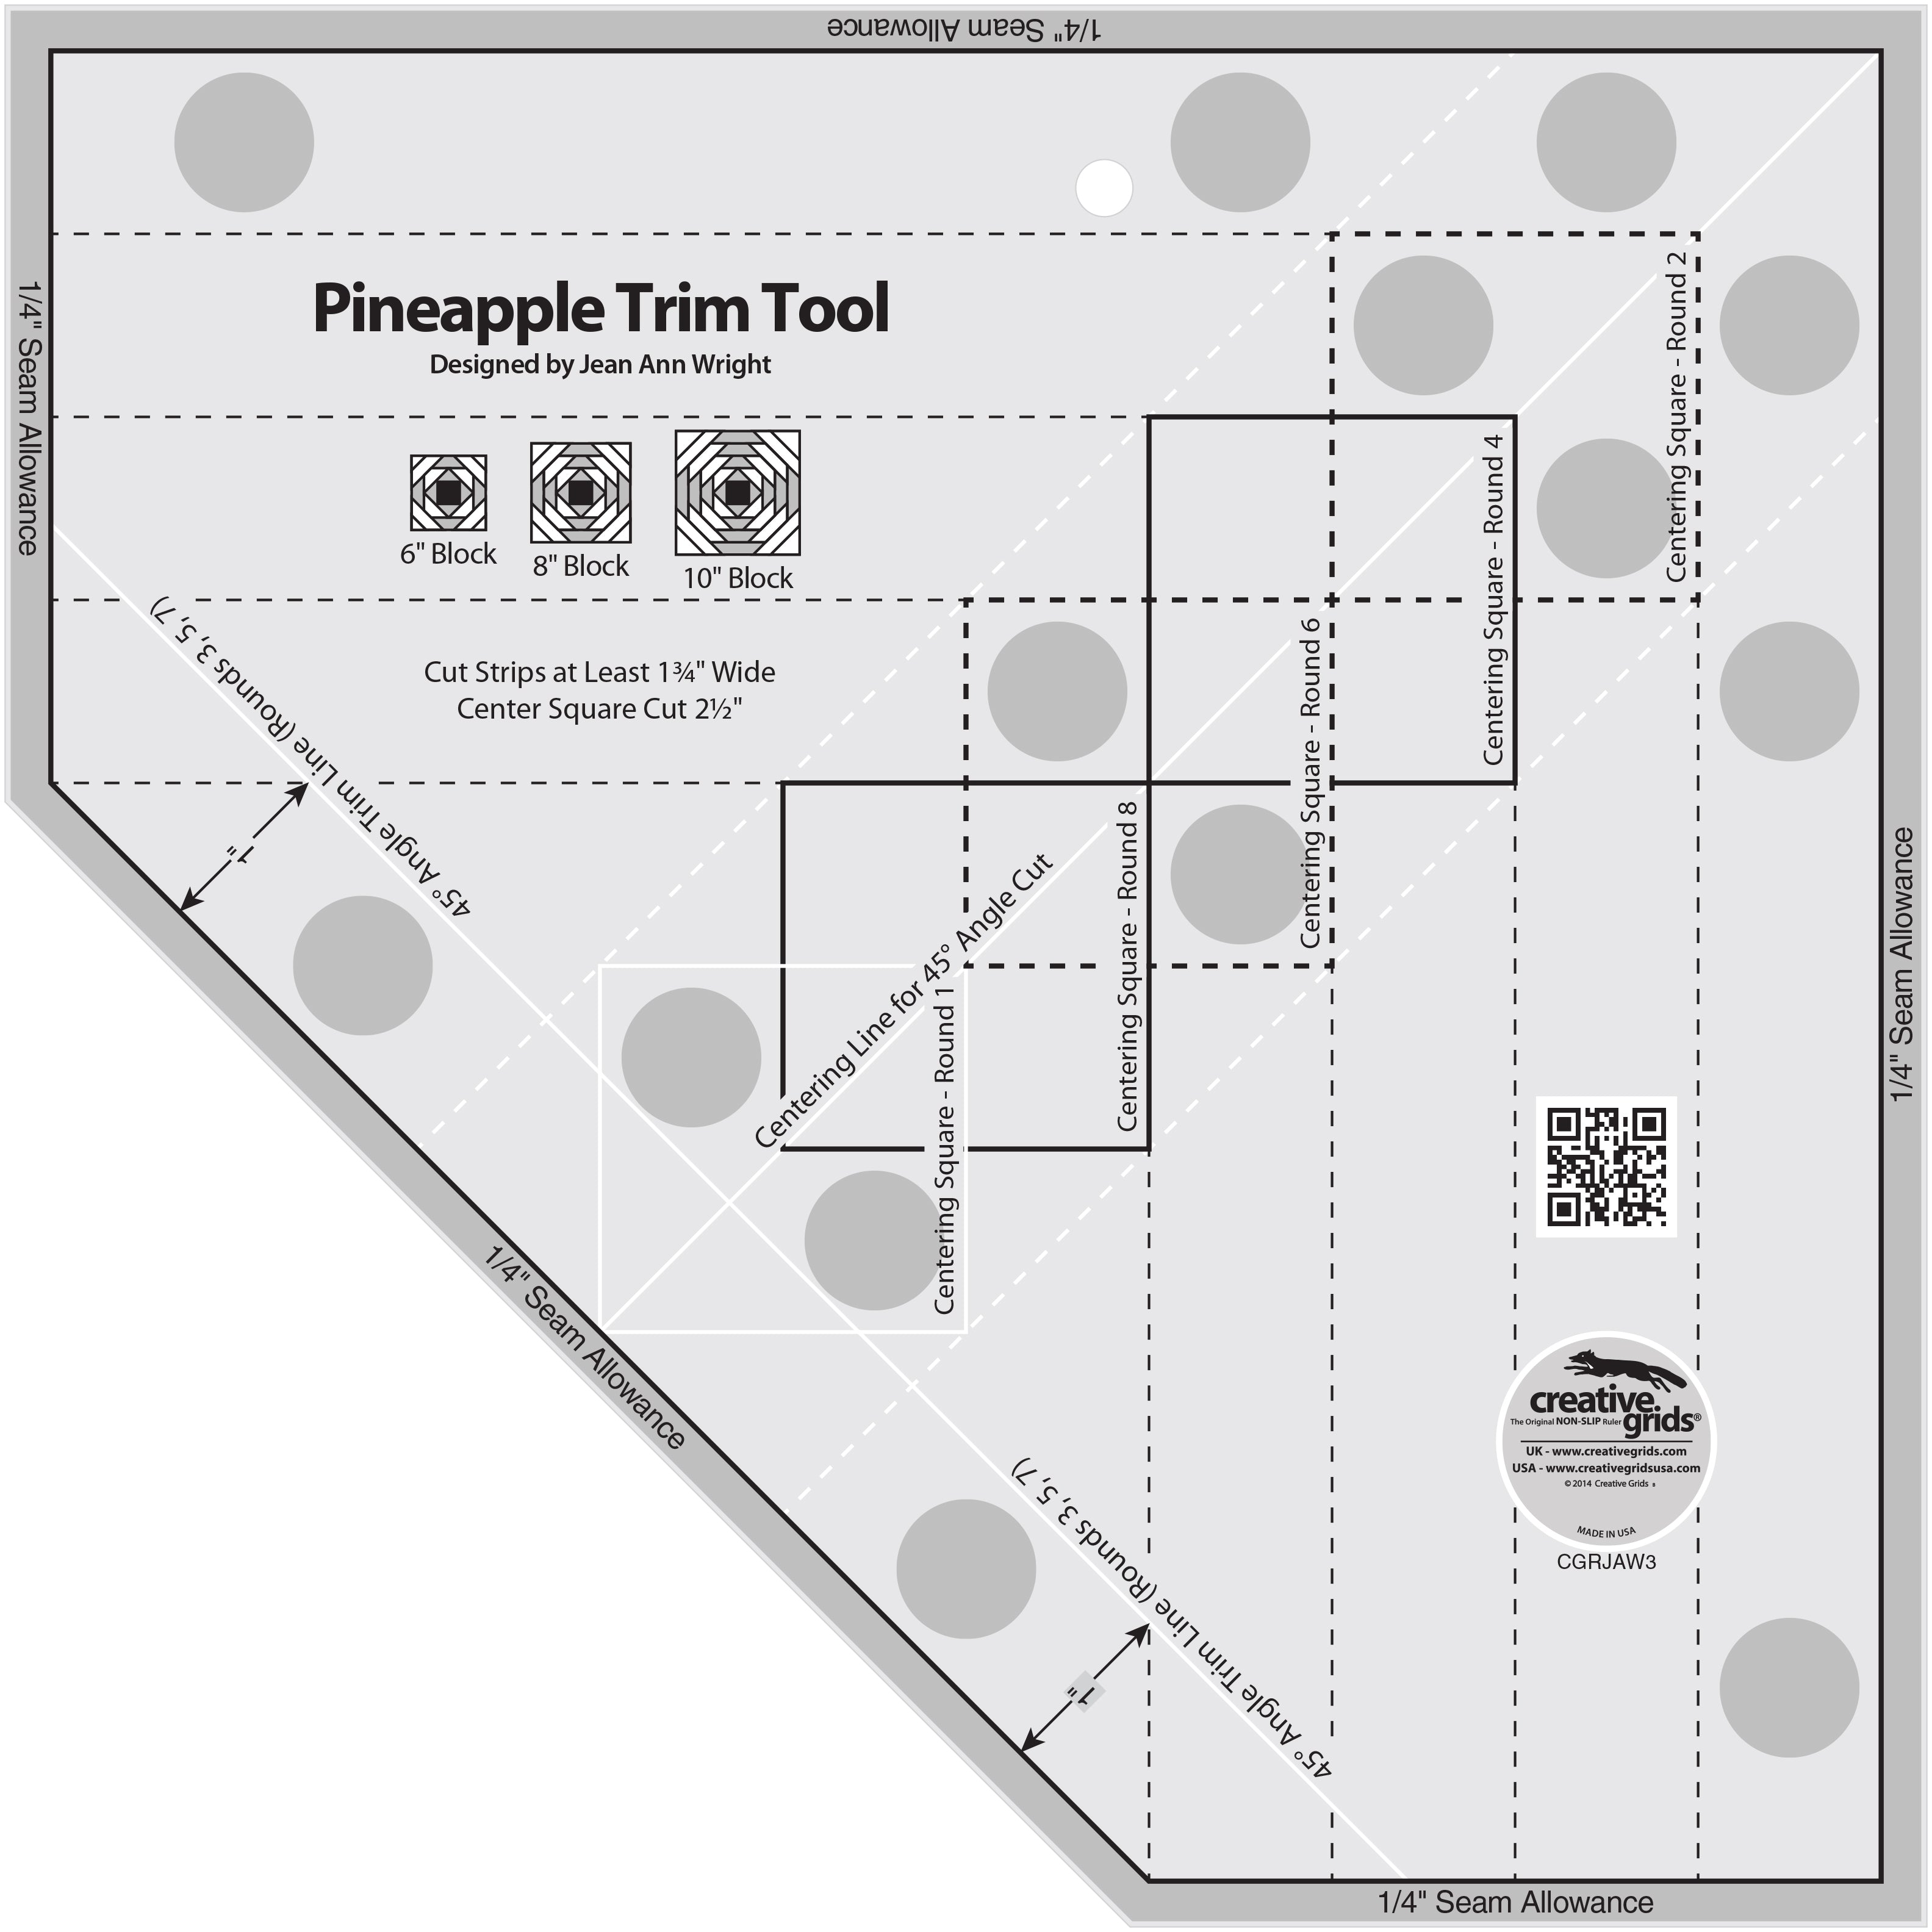 Creative Grids Pineapple Trim Tool 10-1/2-Inch x 10-1/2-Inch Quilt Ruler